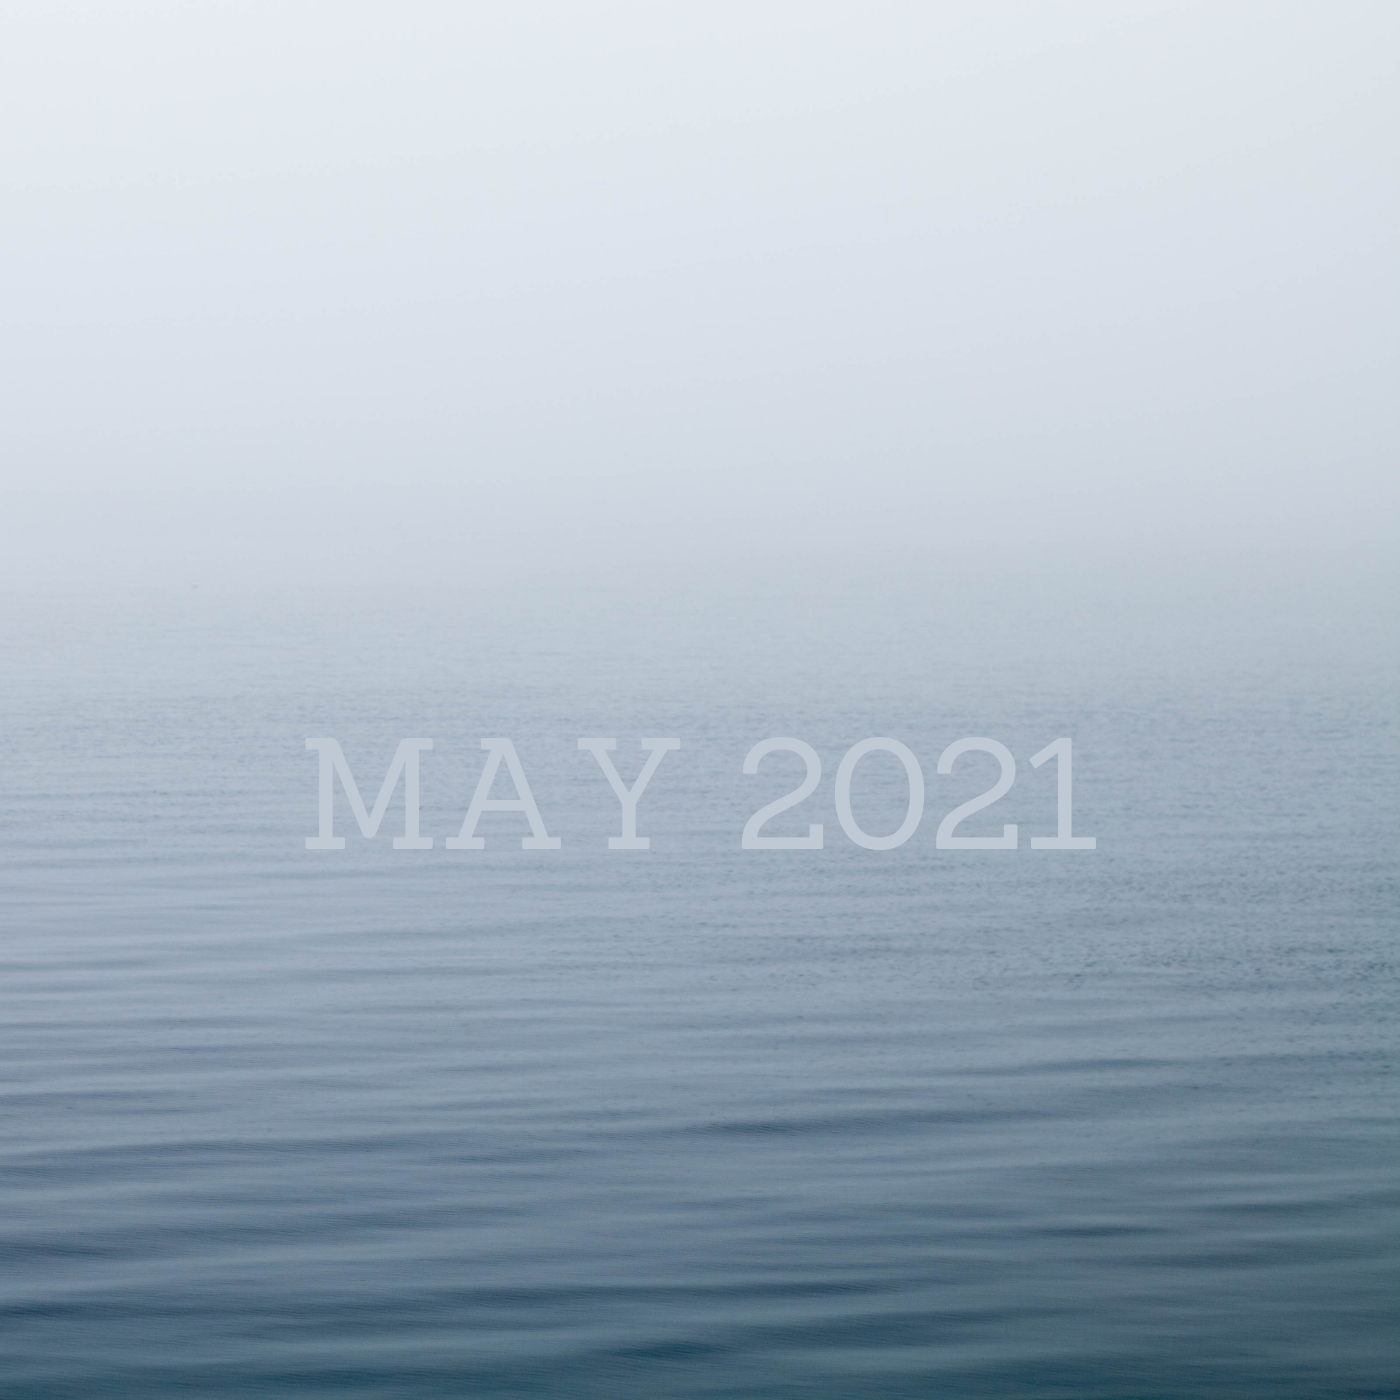 a square image of gently rippling water in blue and gray tones reading may 2021 in the center